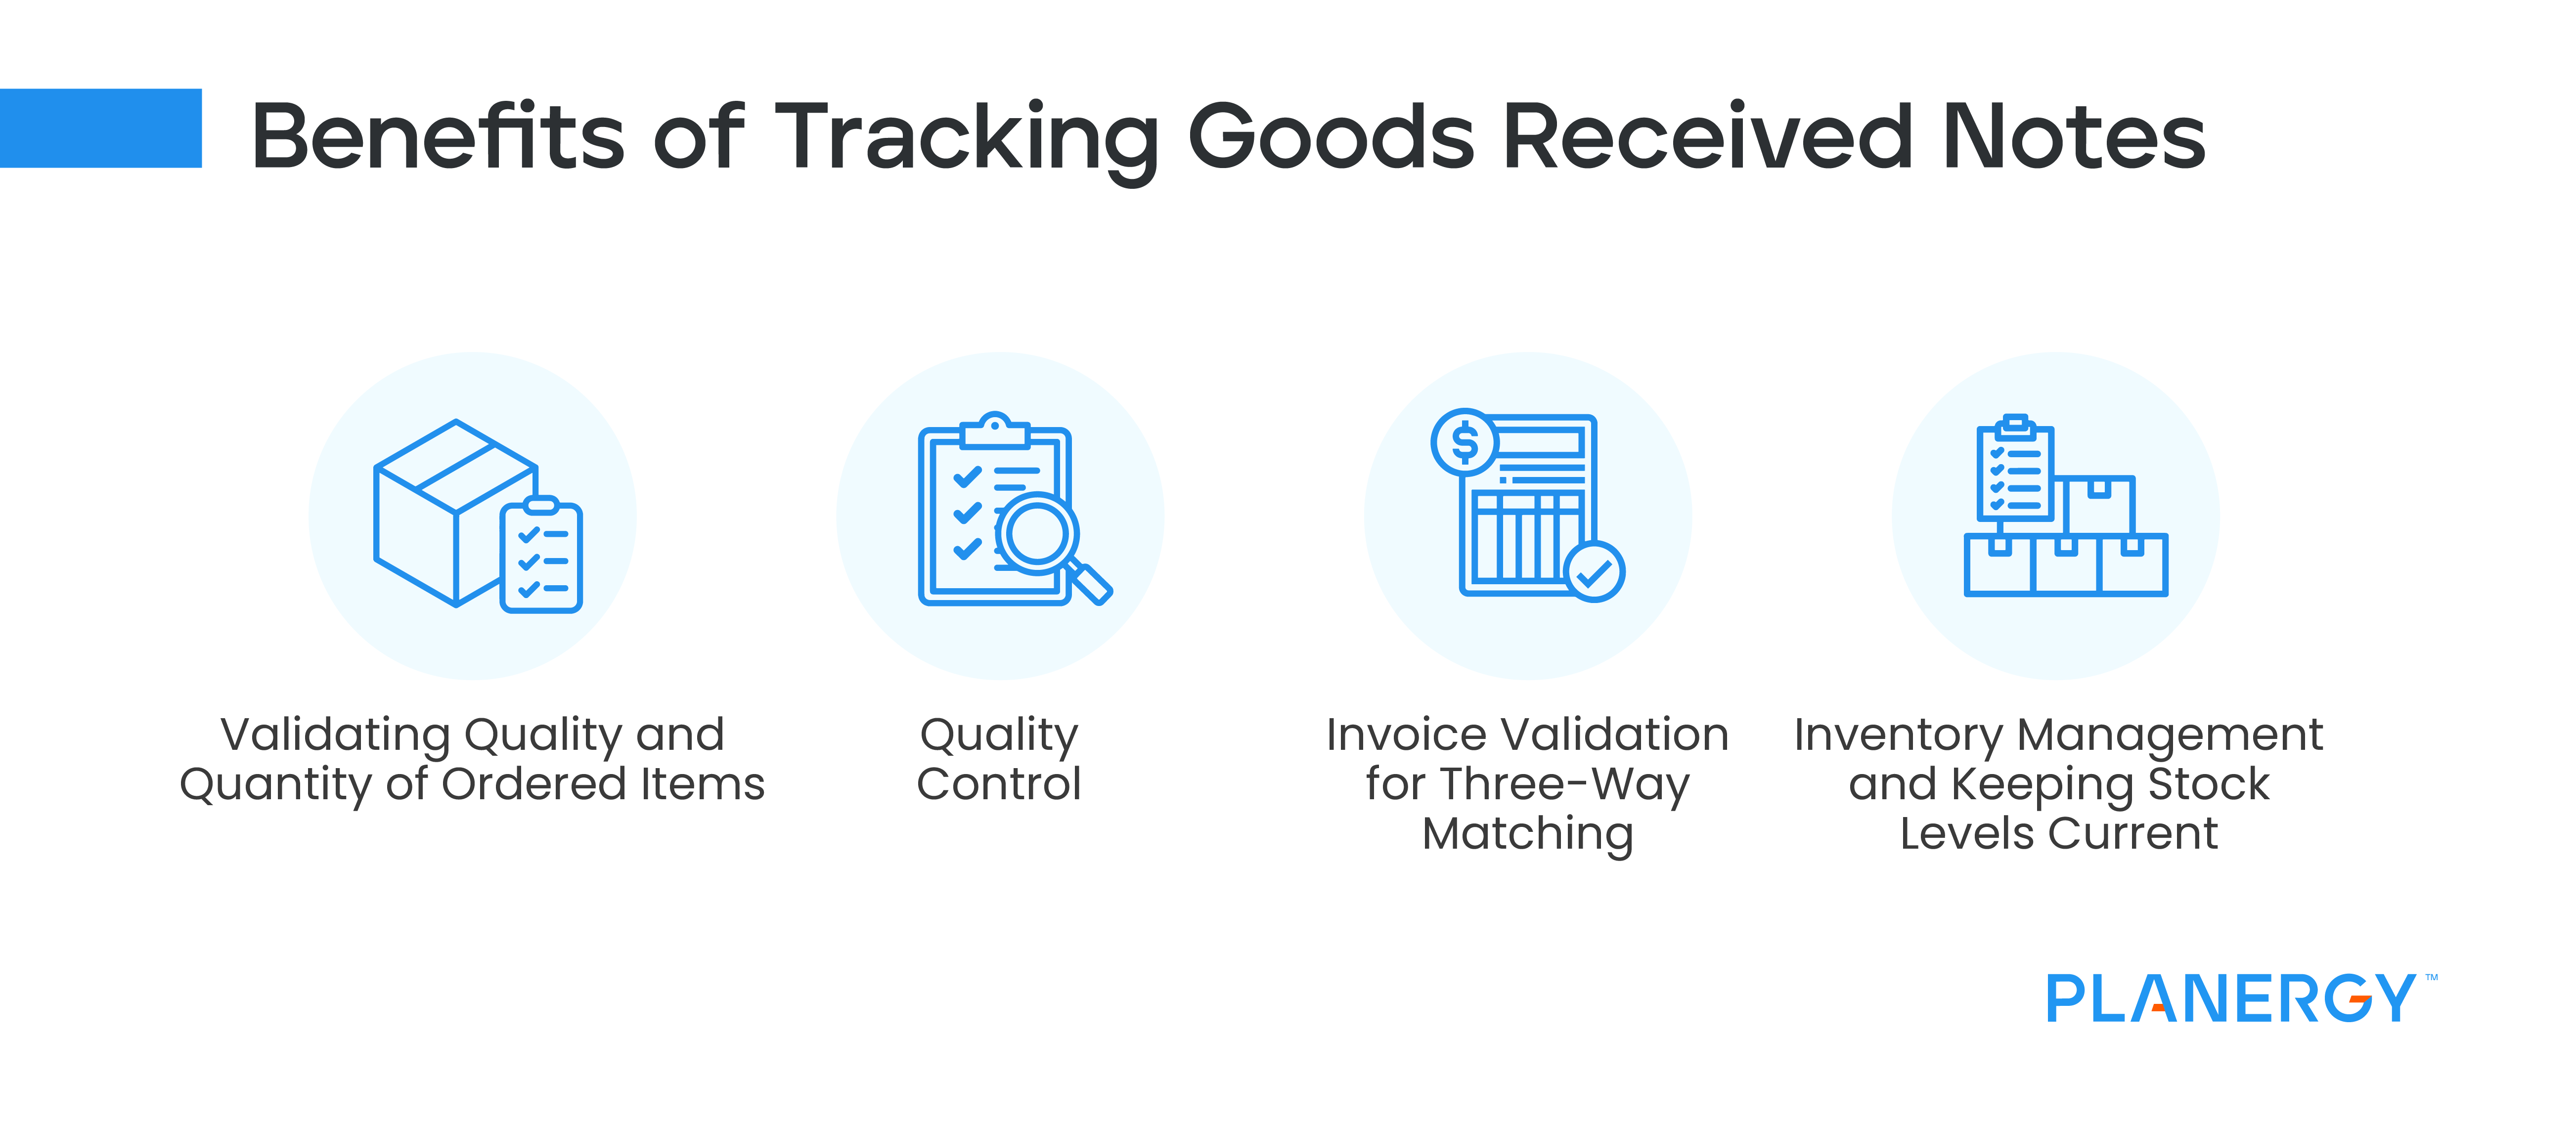 Benefits of Tracking Goods Reeived Notes